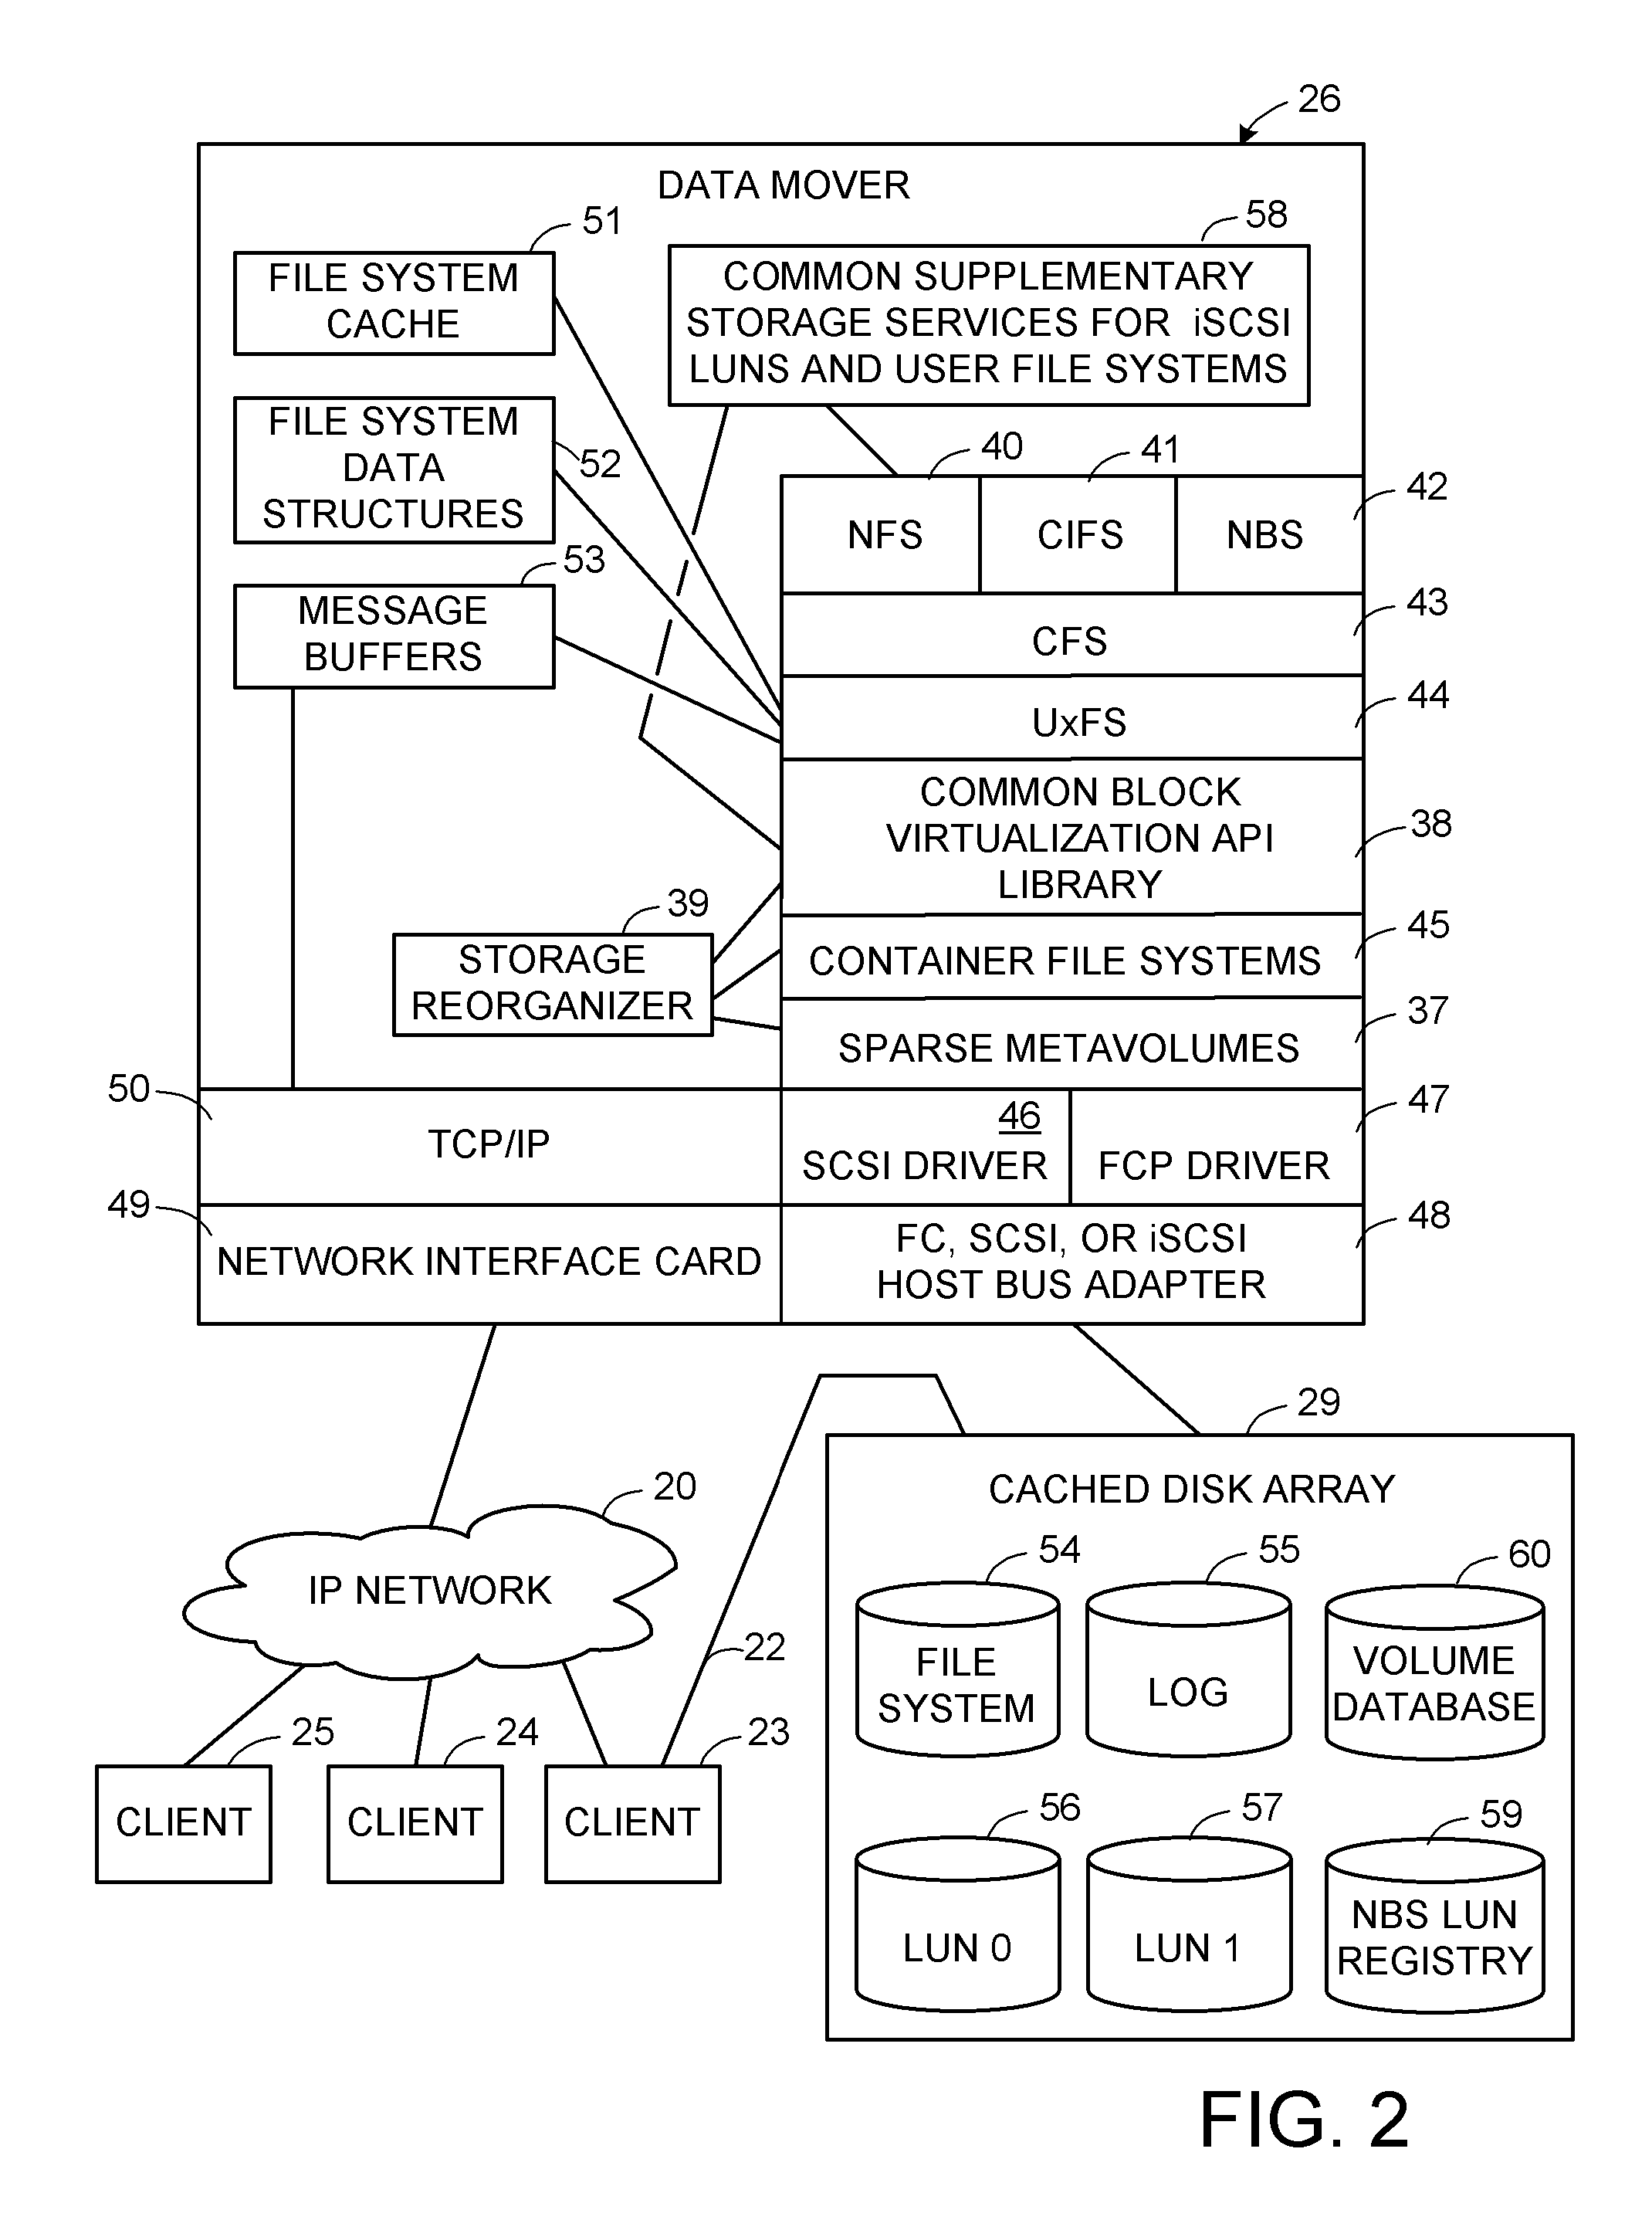 Thin provisioning of a file system and an iSCSI LUN through a common mechanism